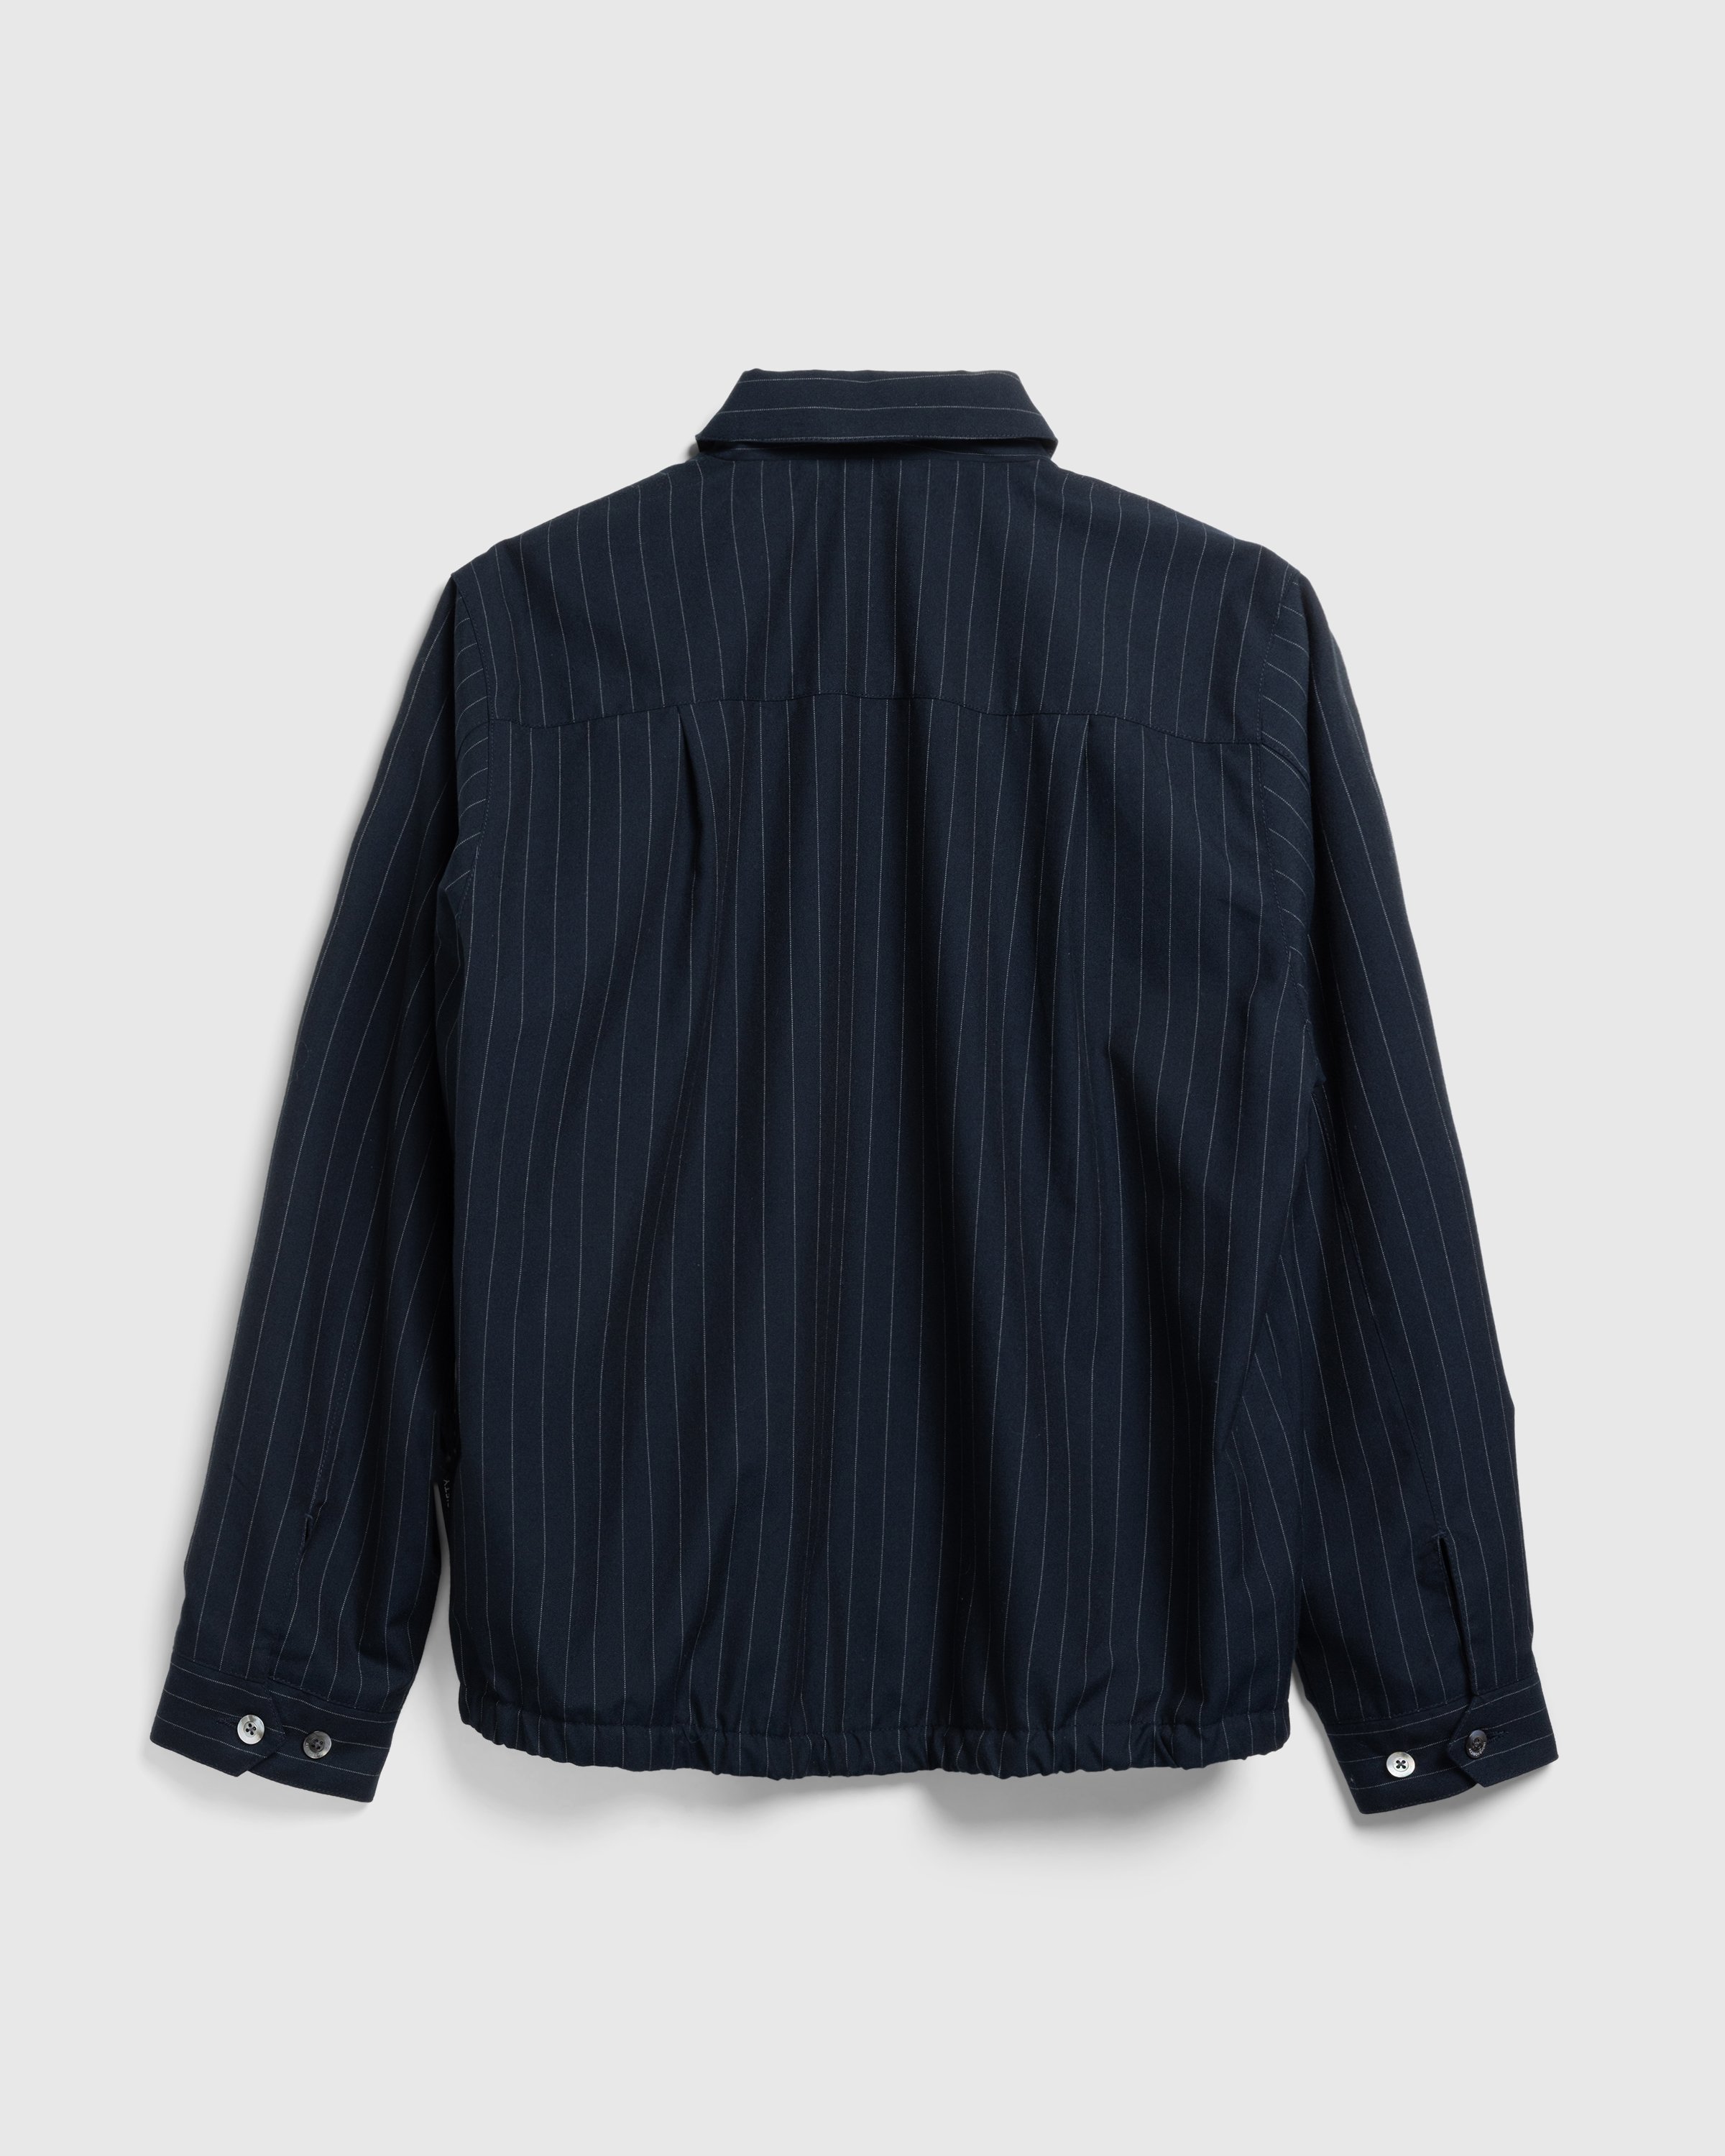 Highsnobiety HS05 - Tropical Suiting Jacket Stripes Navy - Clothing - Stripes Navy - Image 2